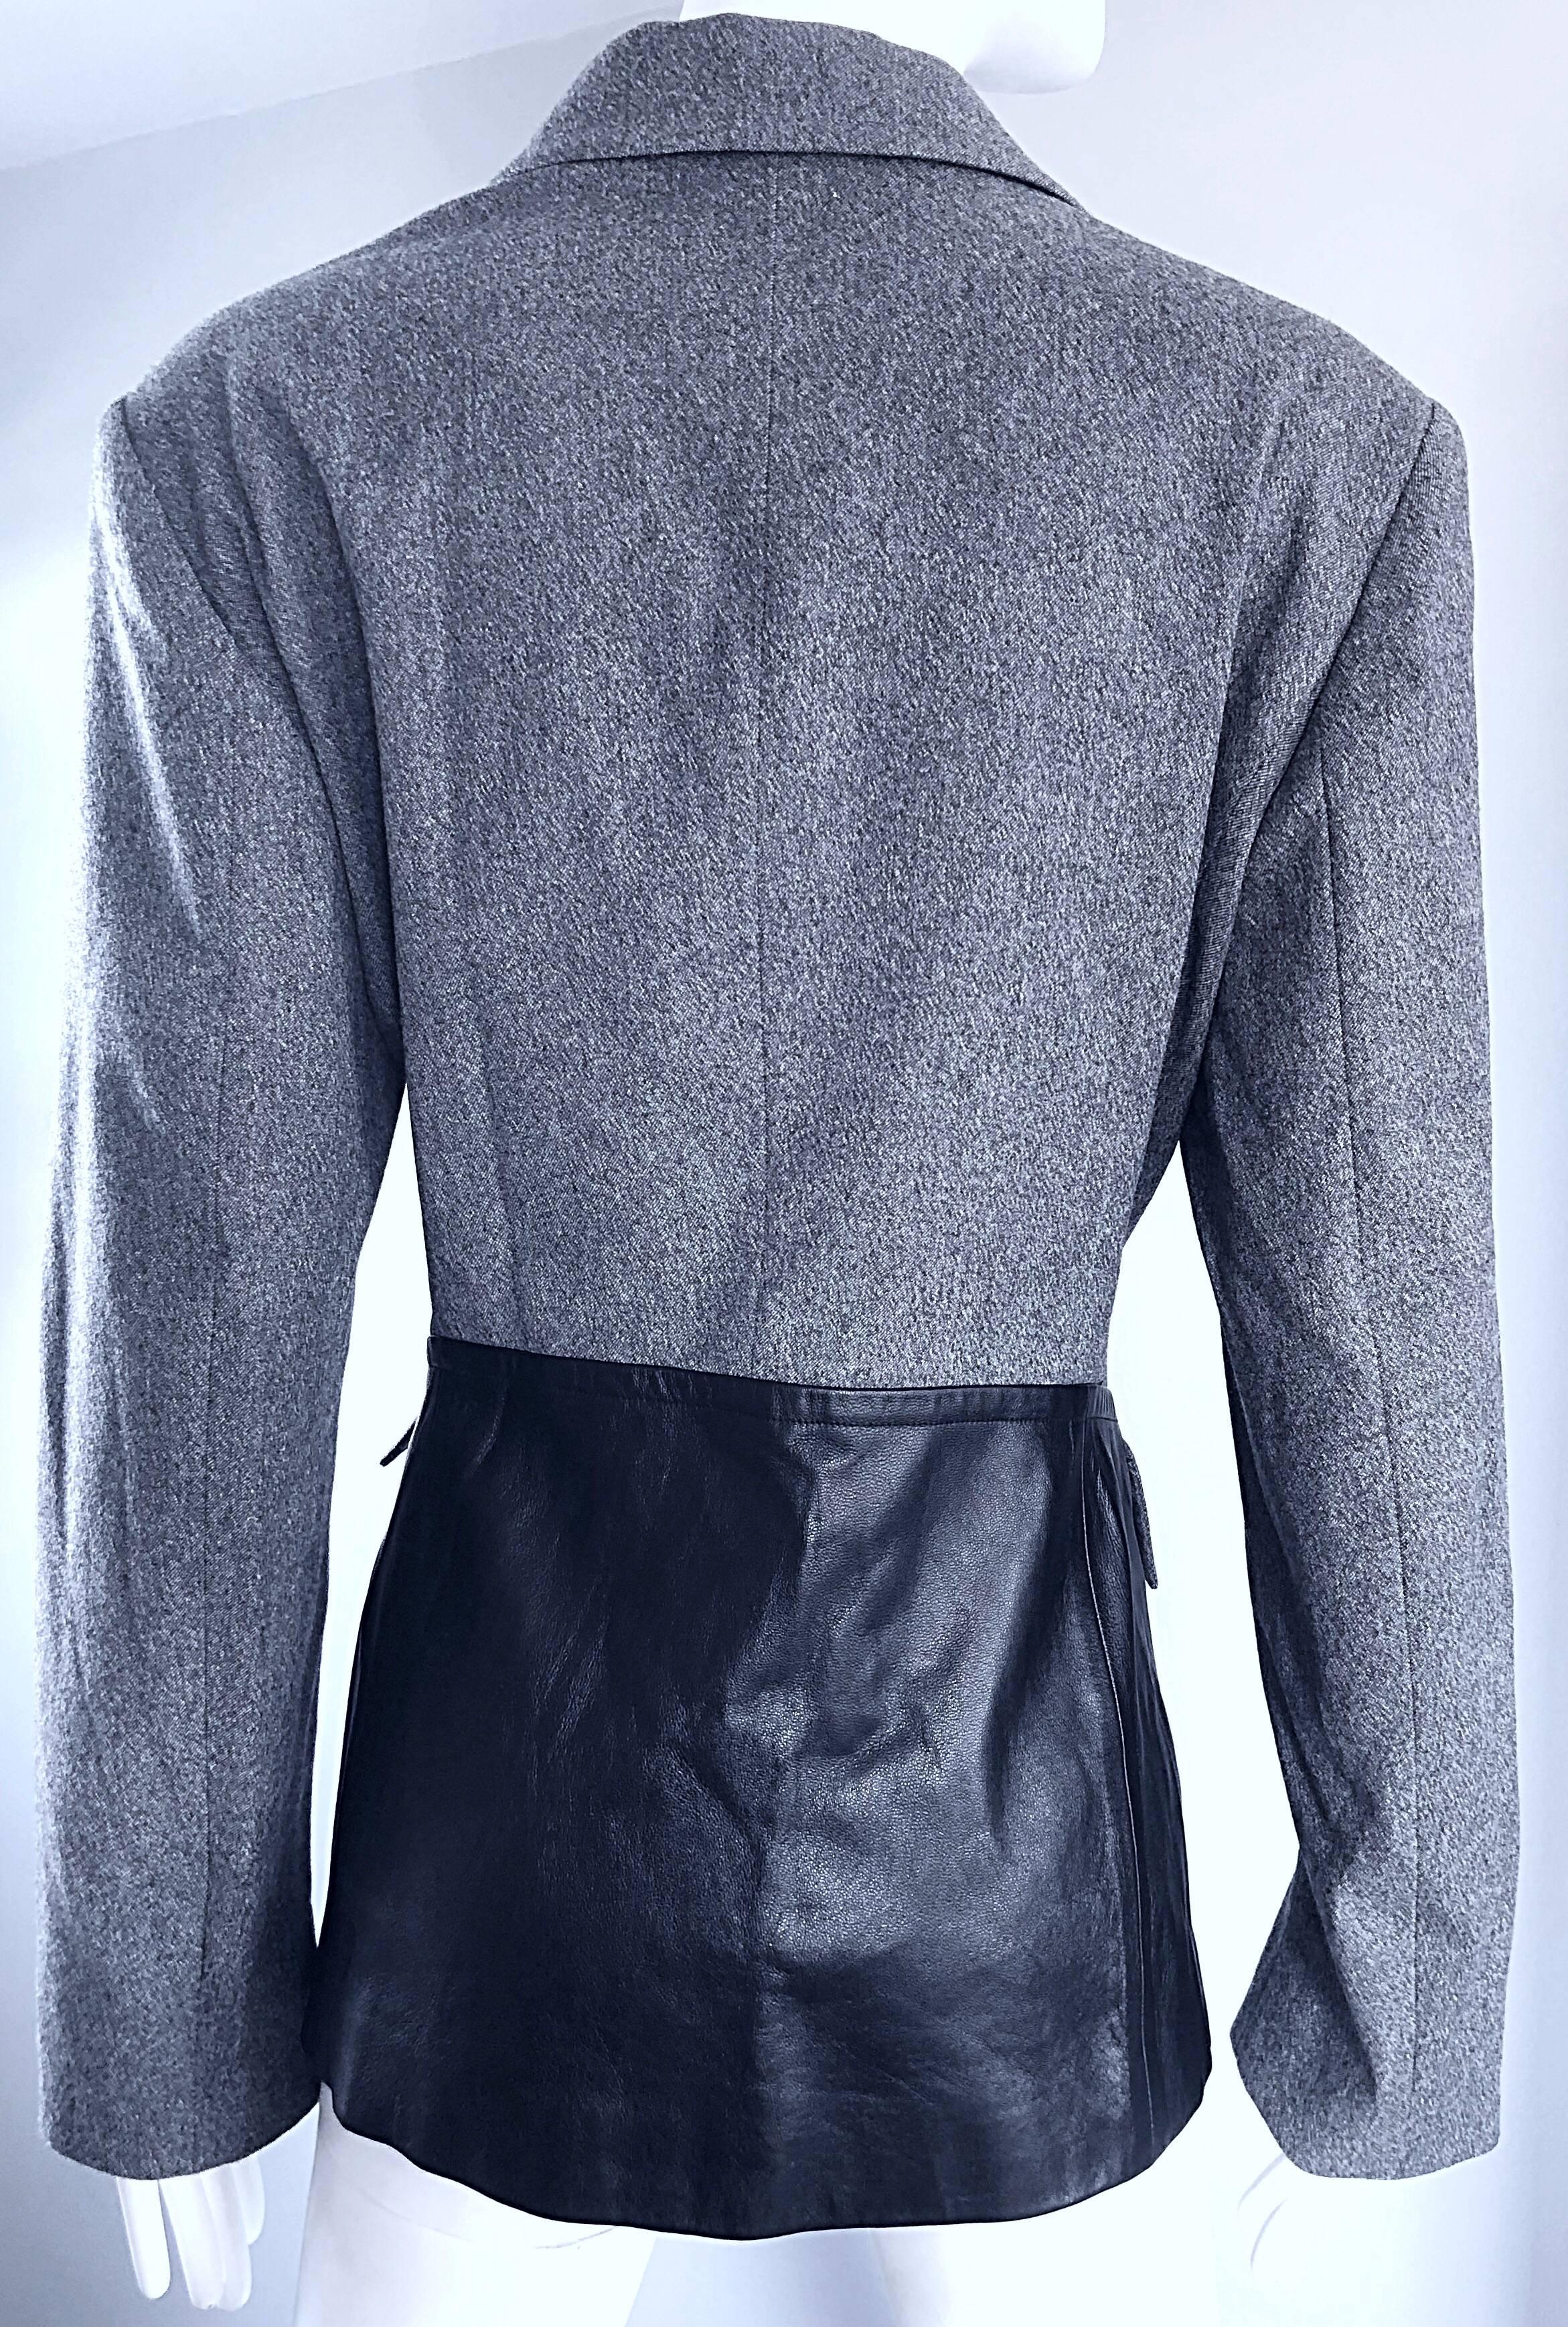 Jean Charles de Castelbajac Gray and Black Wool and Leather Blazer Jacket, 1990s 4